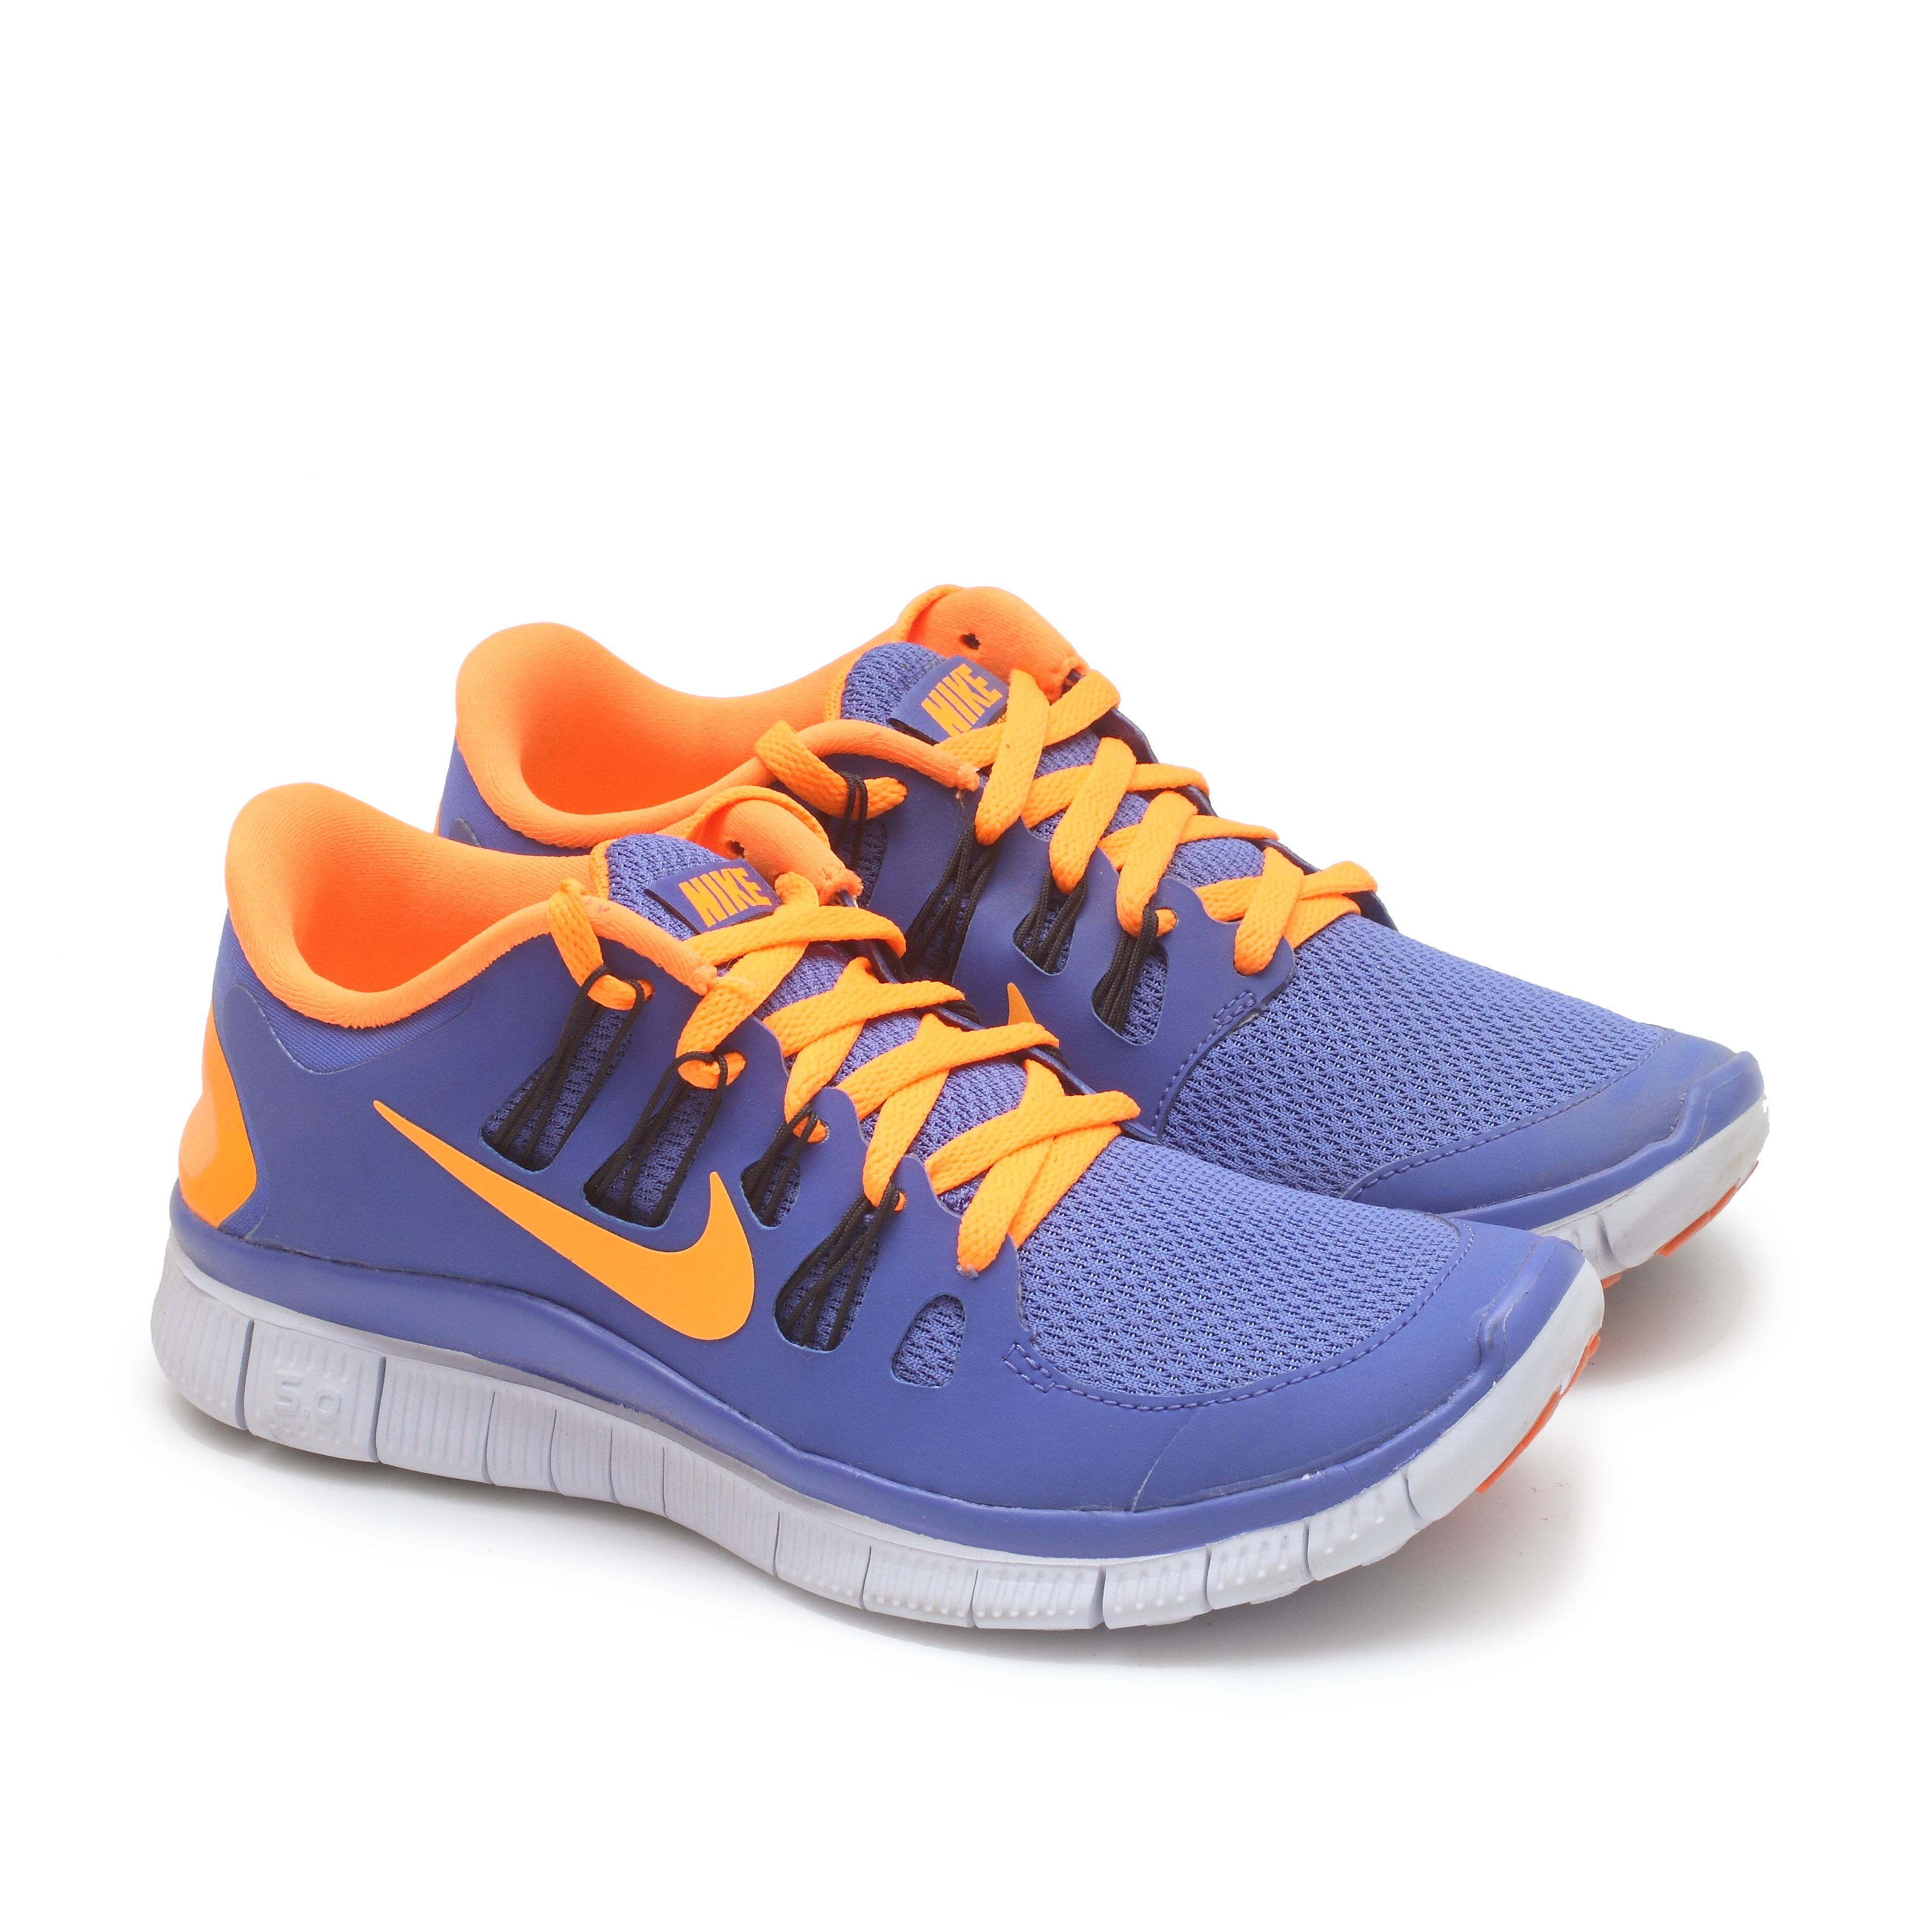 10 sites to buy Nike shoes online in | blogger.com